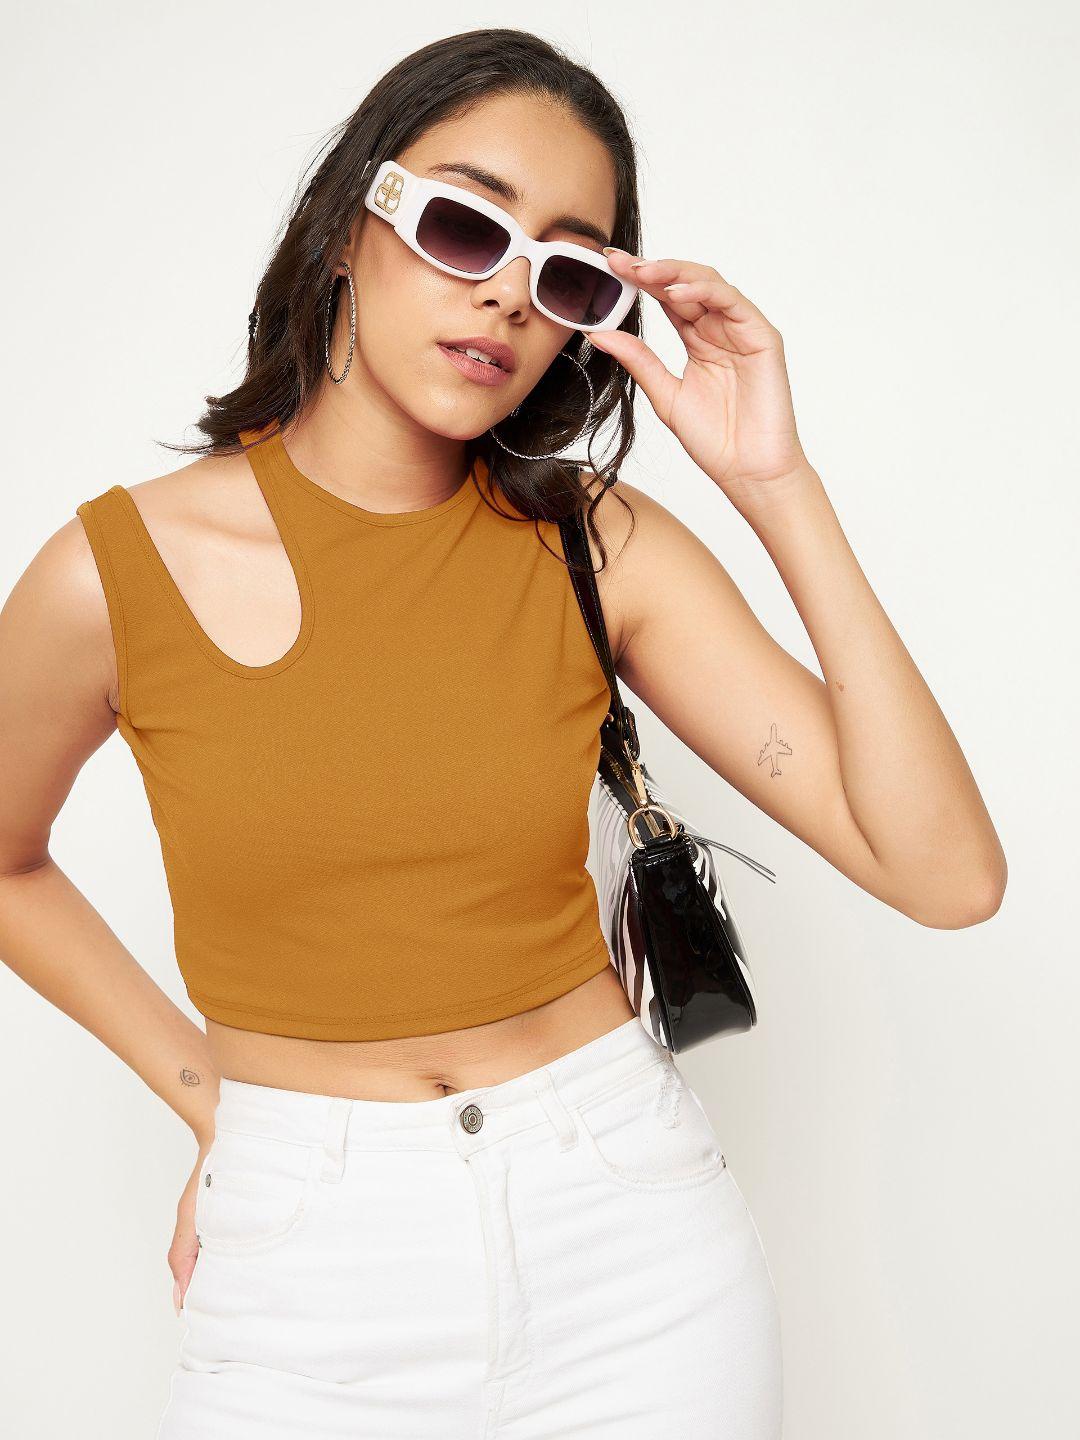 uptownie-lite-women-stretchable-high-neck-cut-out-crop-top